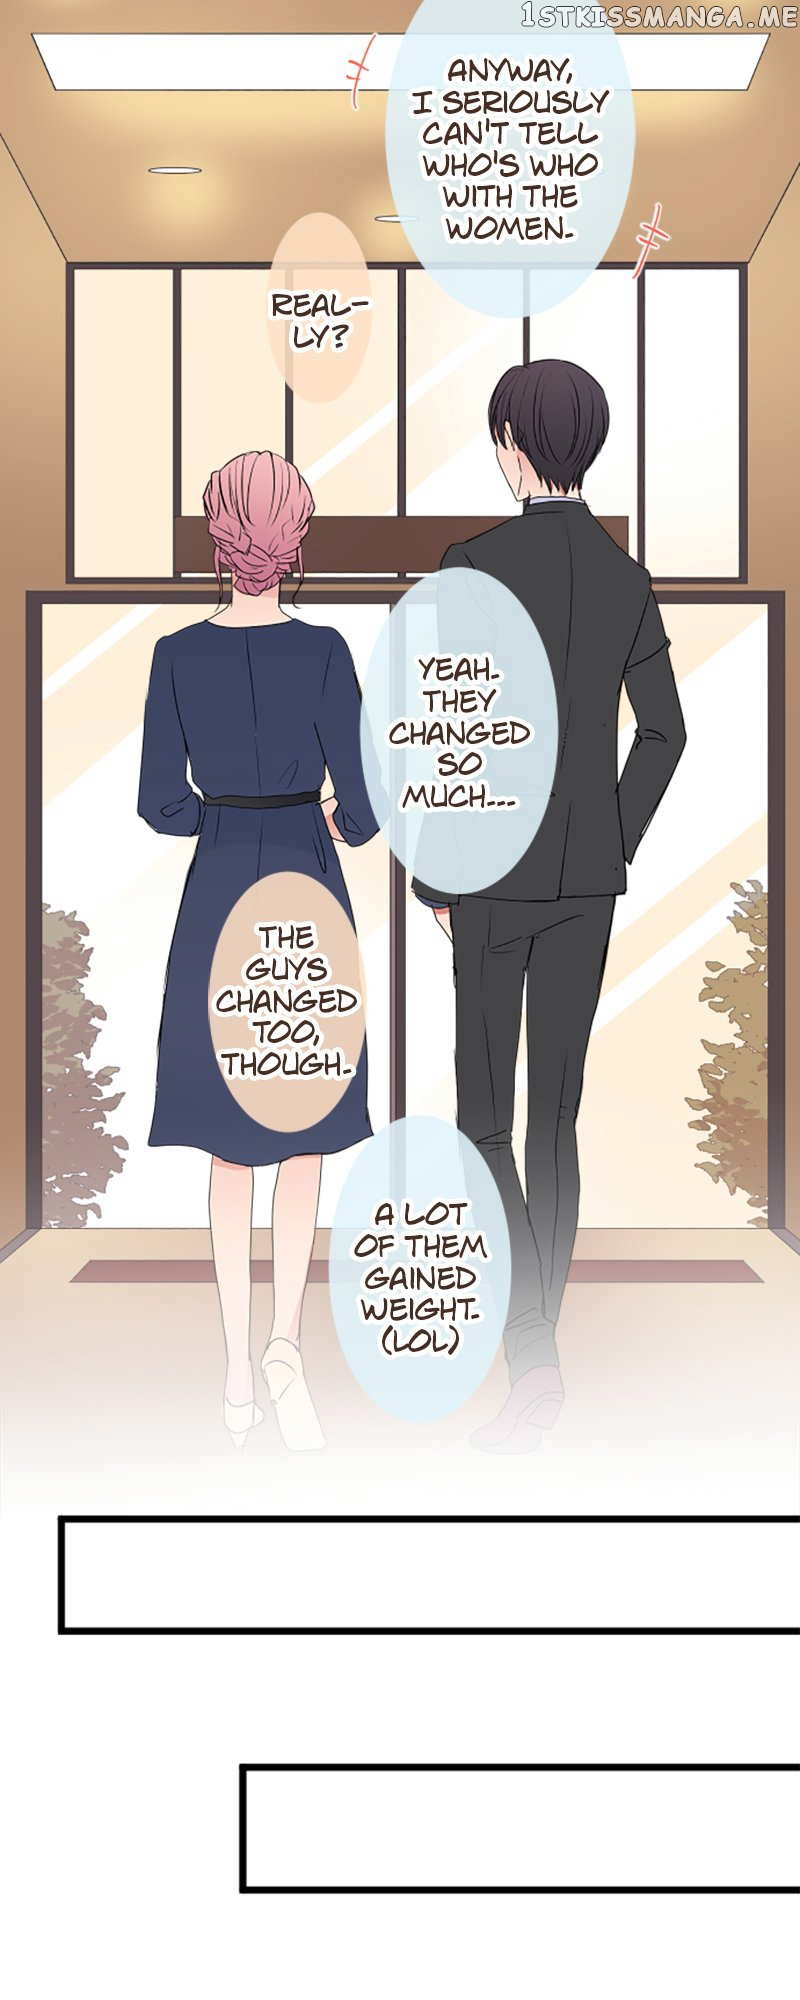 Next to You ~The Story of a Couple with a Huge Age Difference~ Chapter 90 - p2.6 - page 14